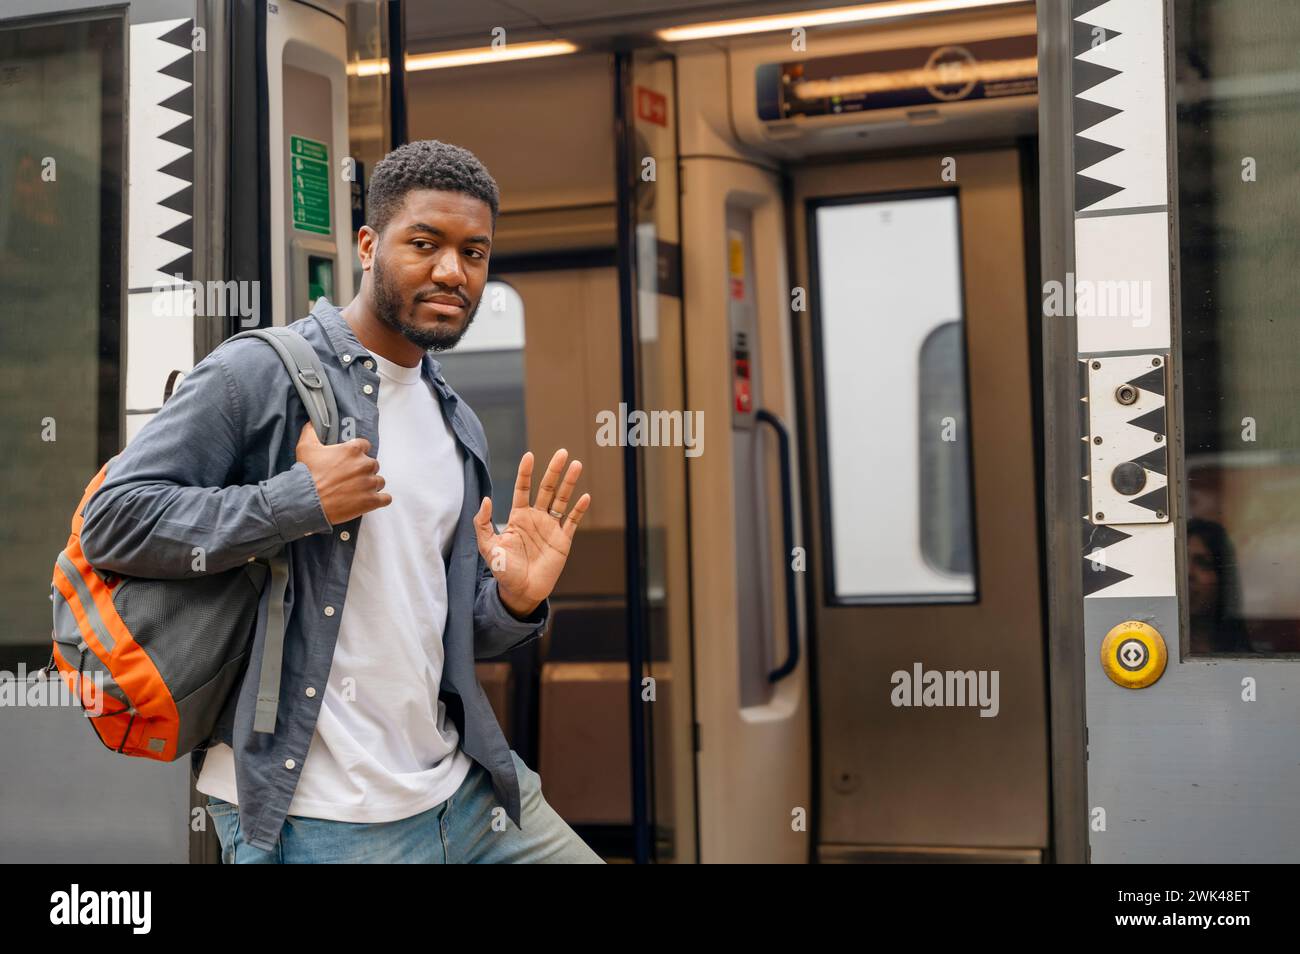 A sad young man getting on a train at the railway station waving goodbye Stock Photo